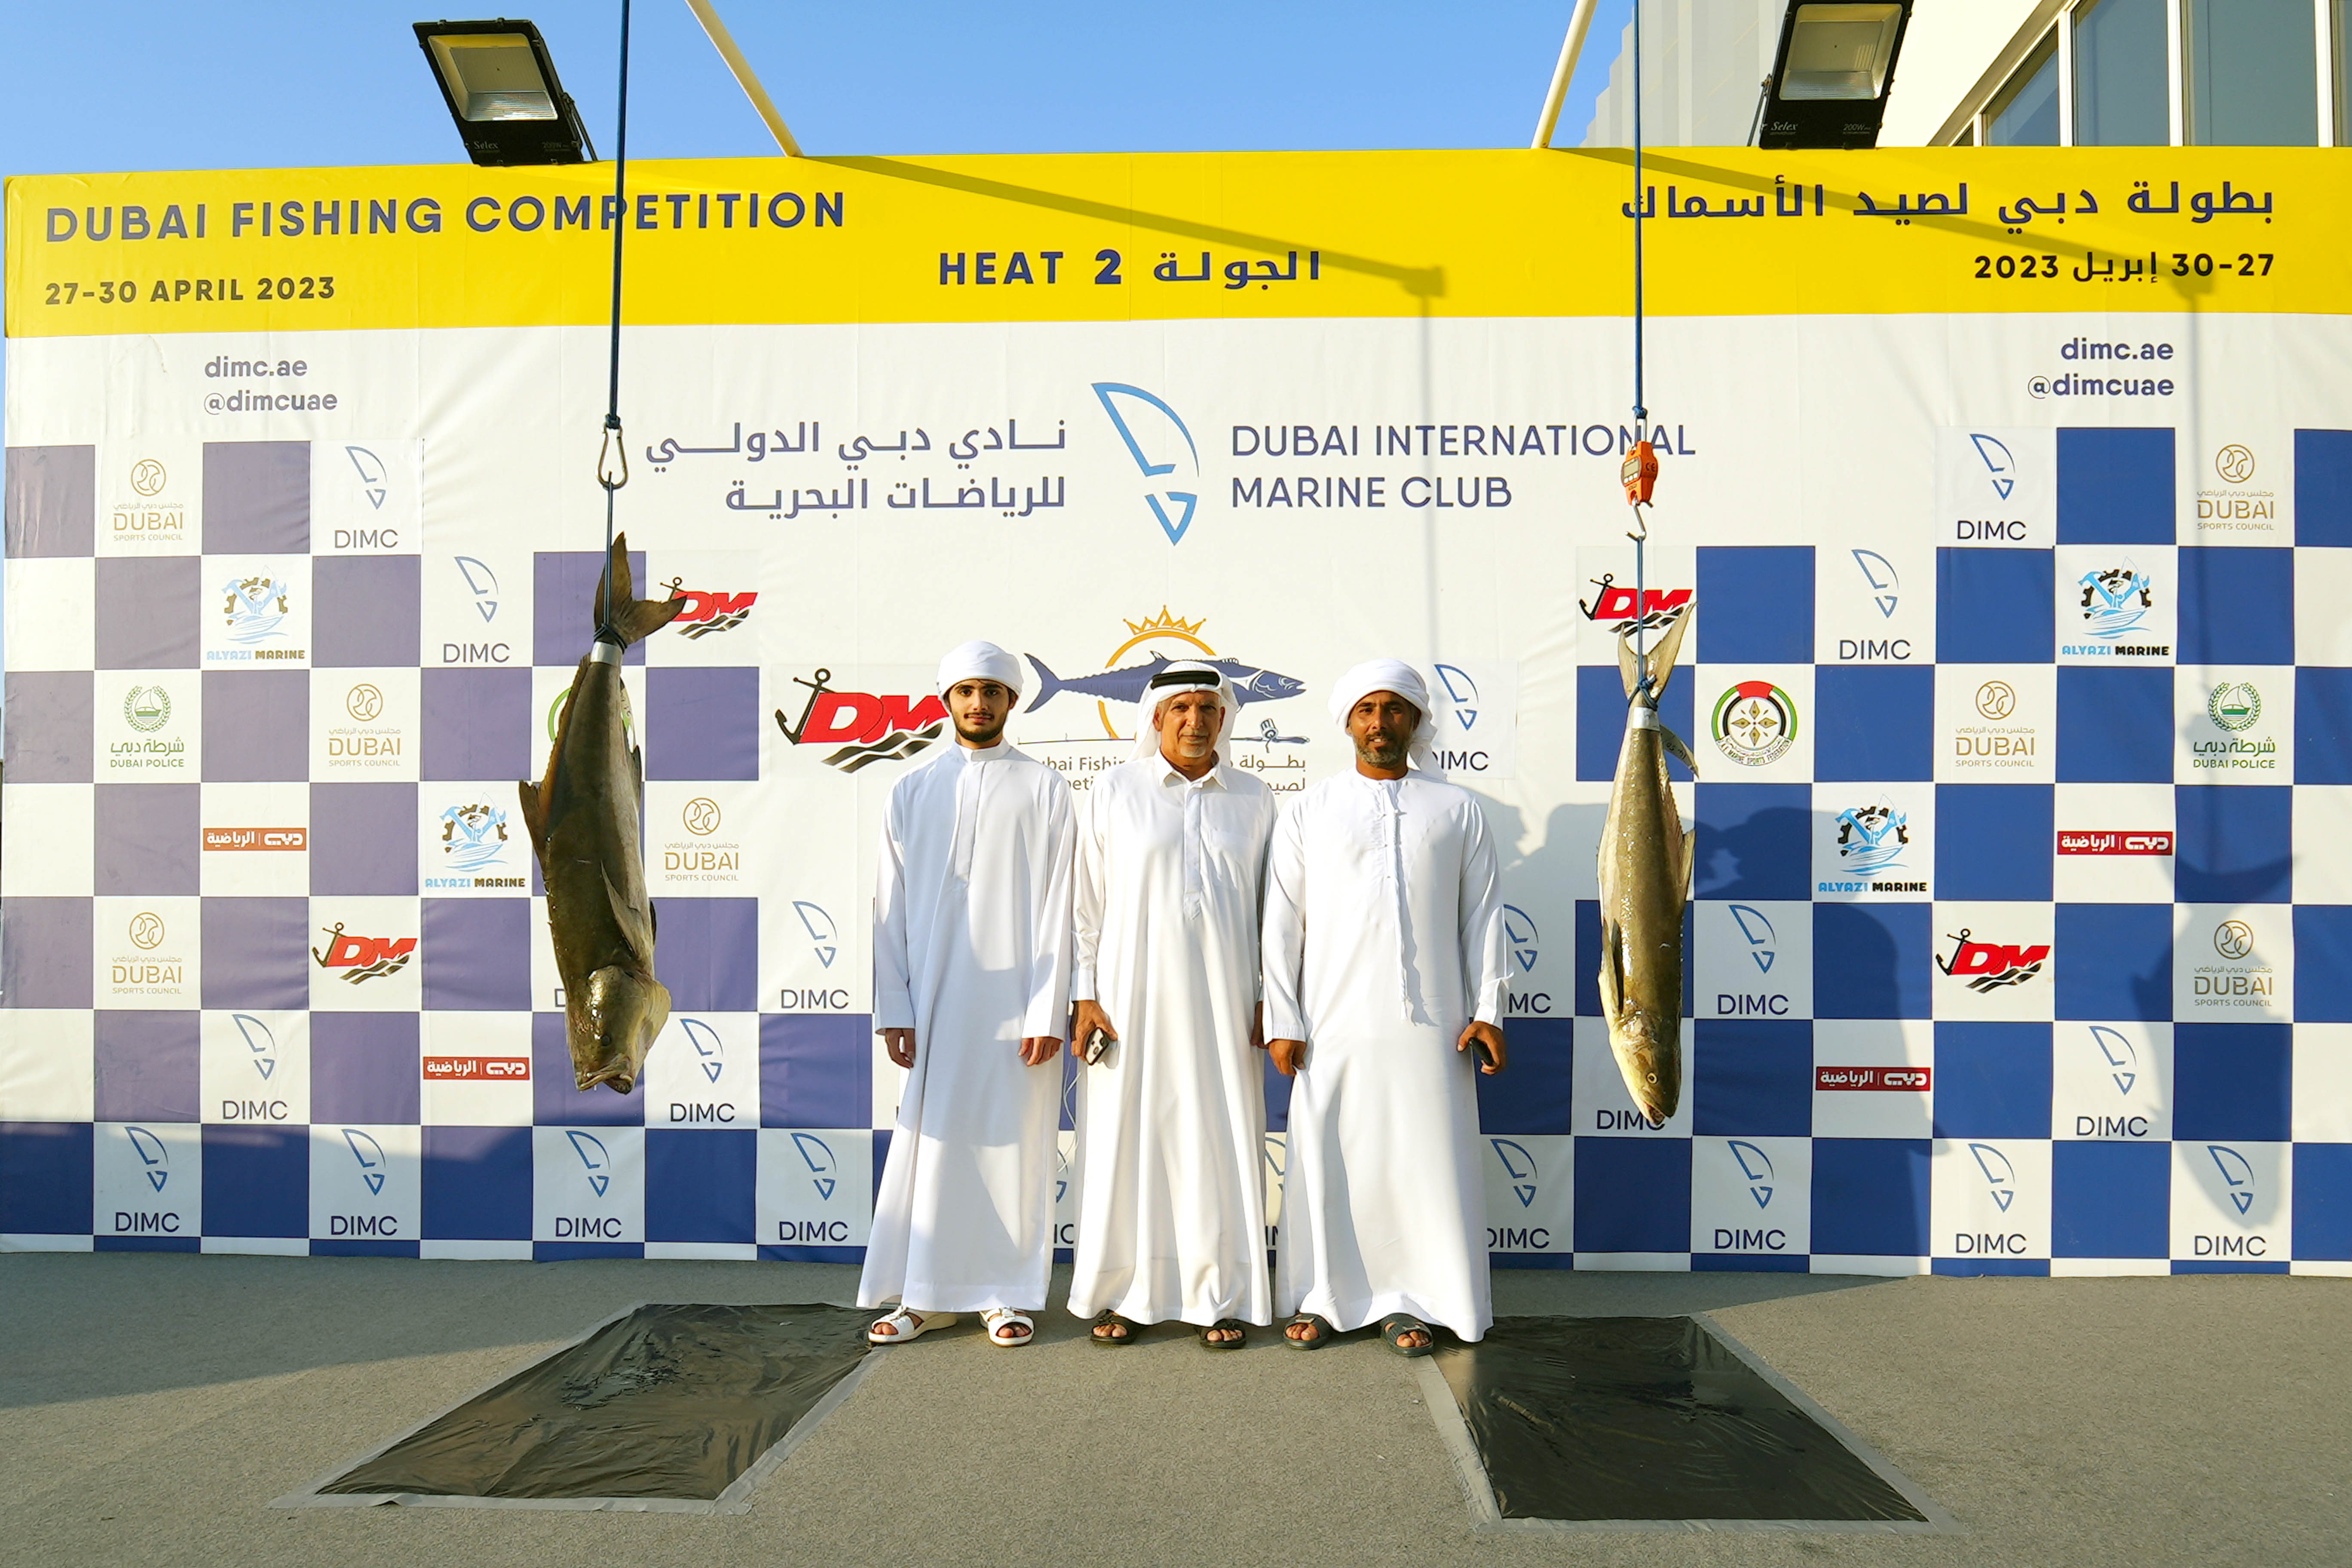 Today Marks the Conclusion of the Dubai Fishing Competition